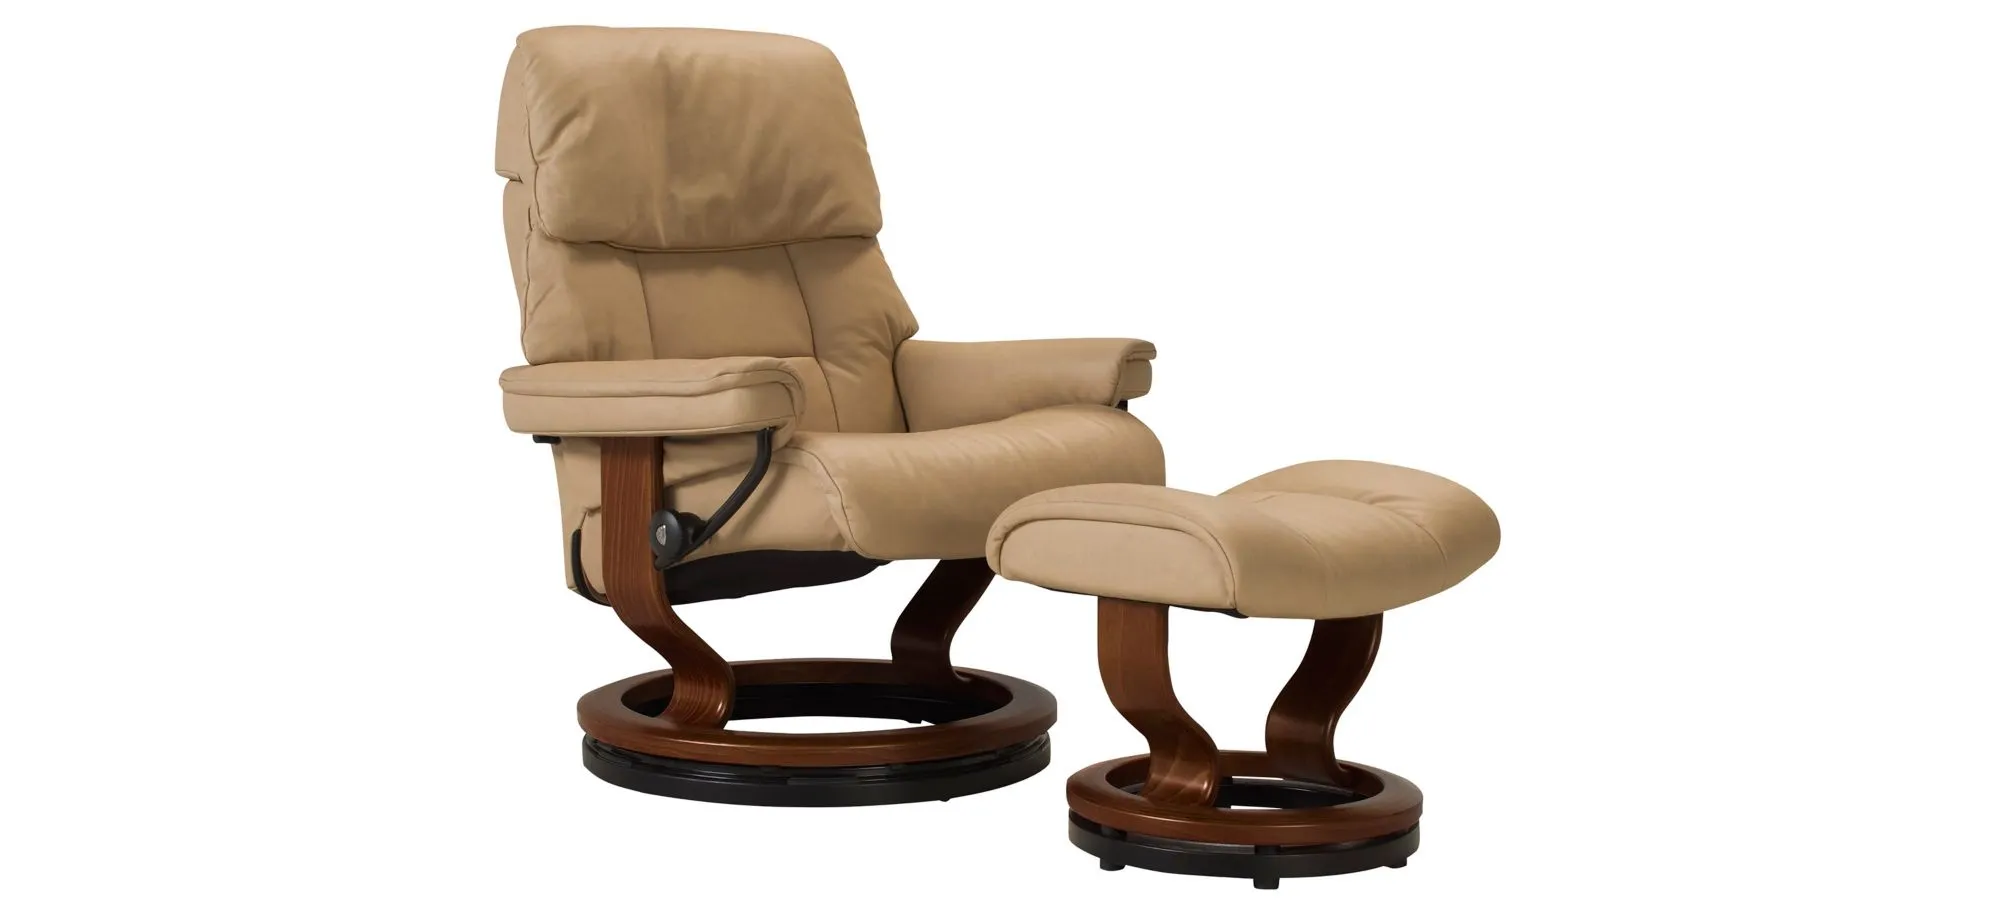 Stressless Ruby Large Leather Reclining Chair and Ottoman w/ Rings in Sand / Brown by Stressless